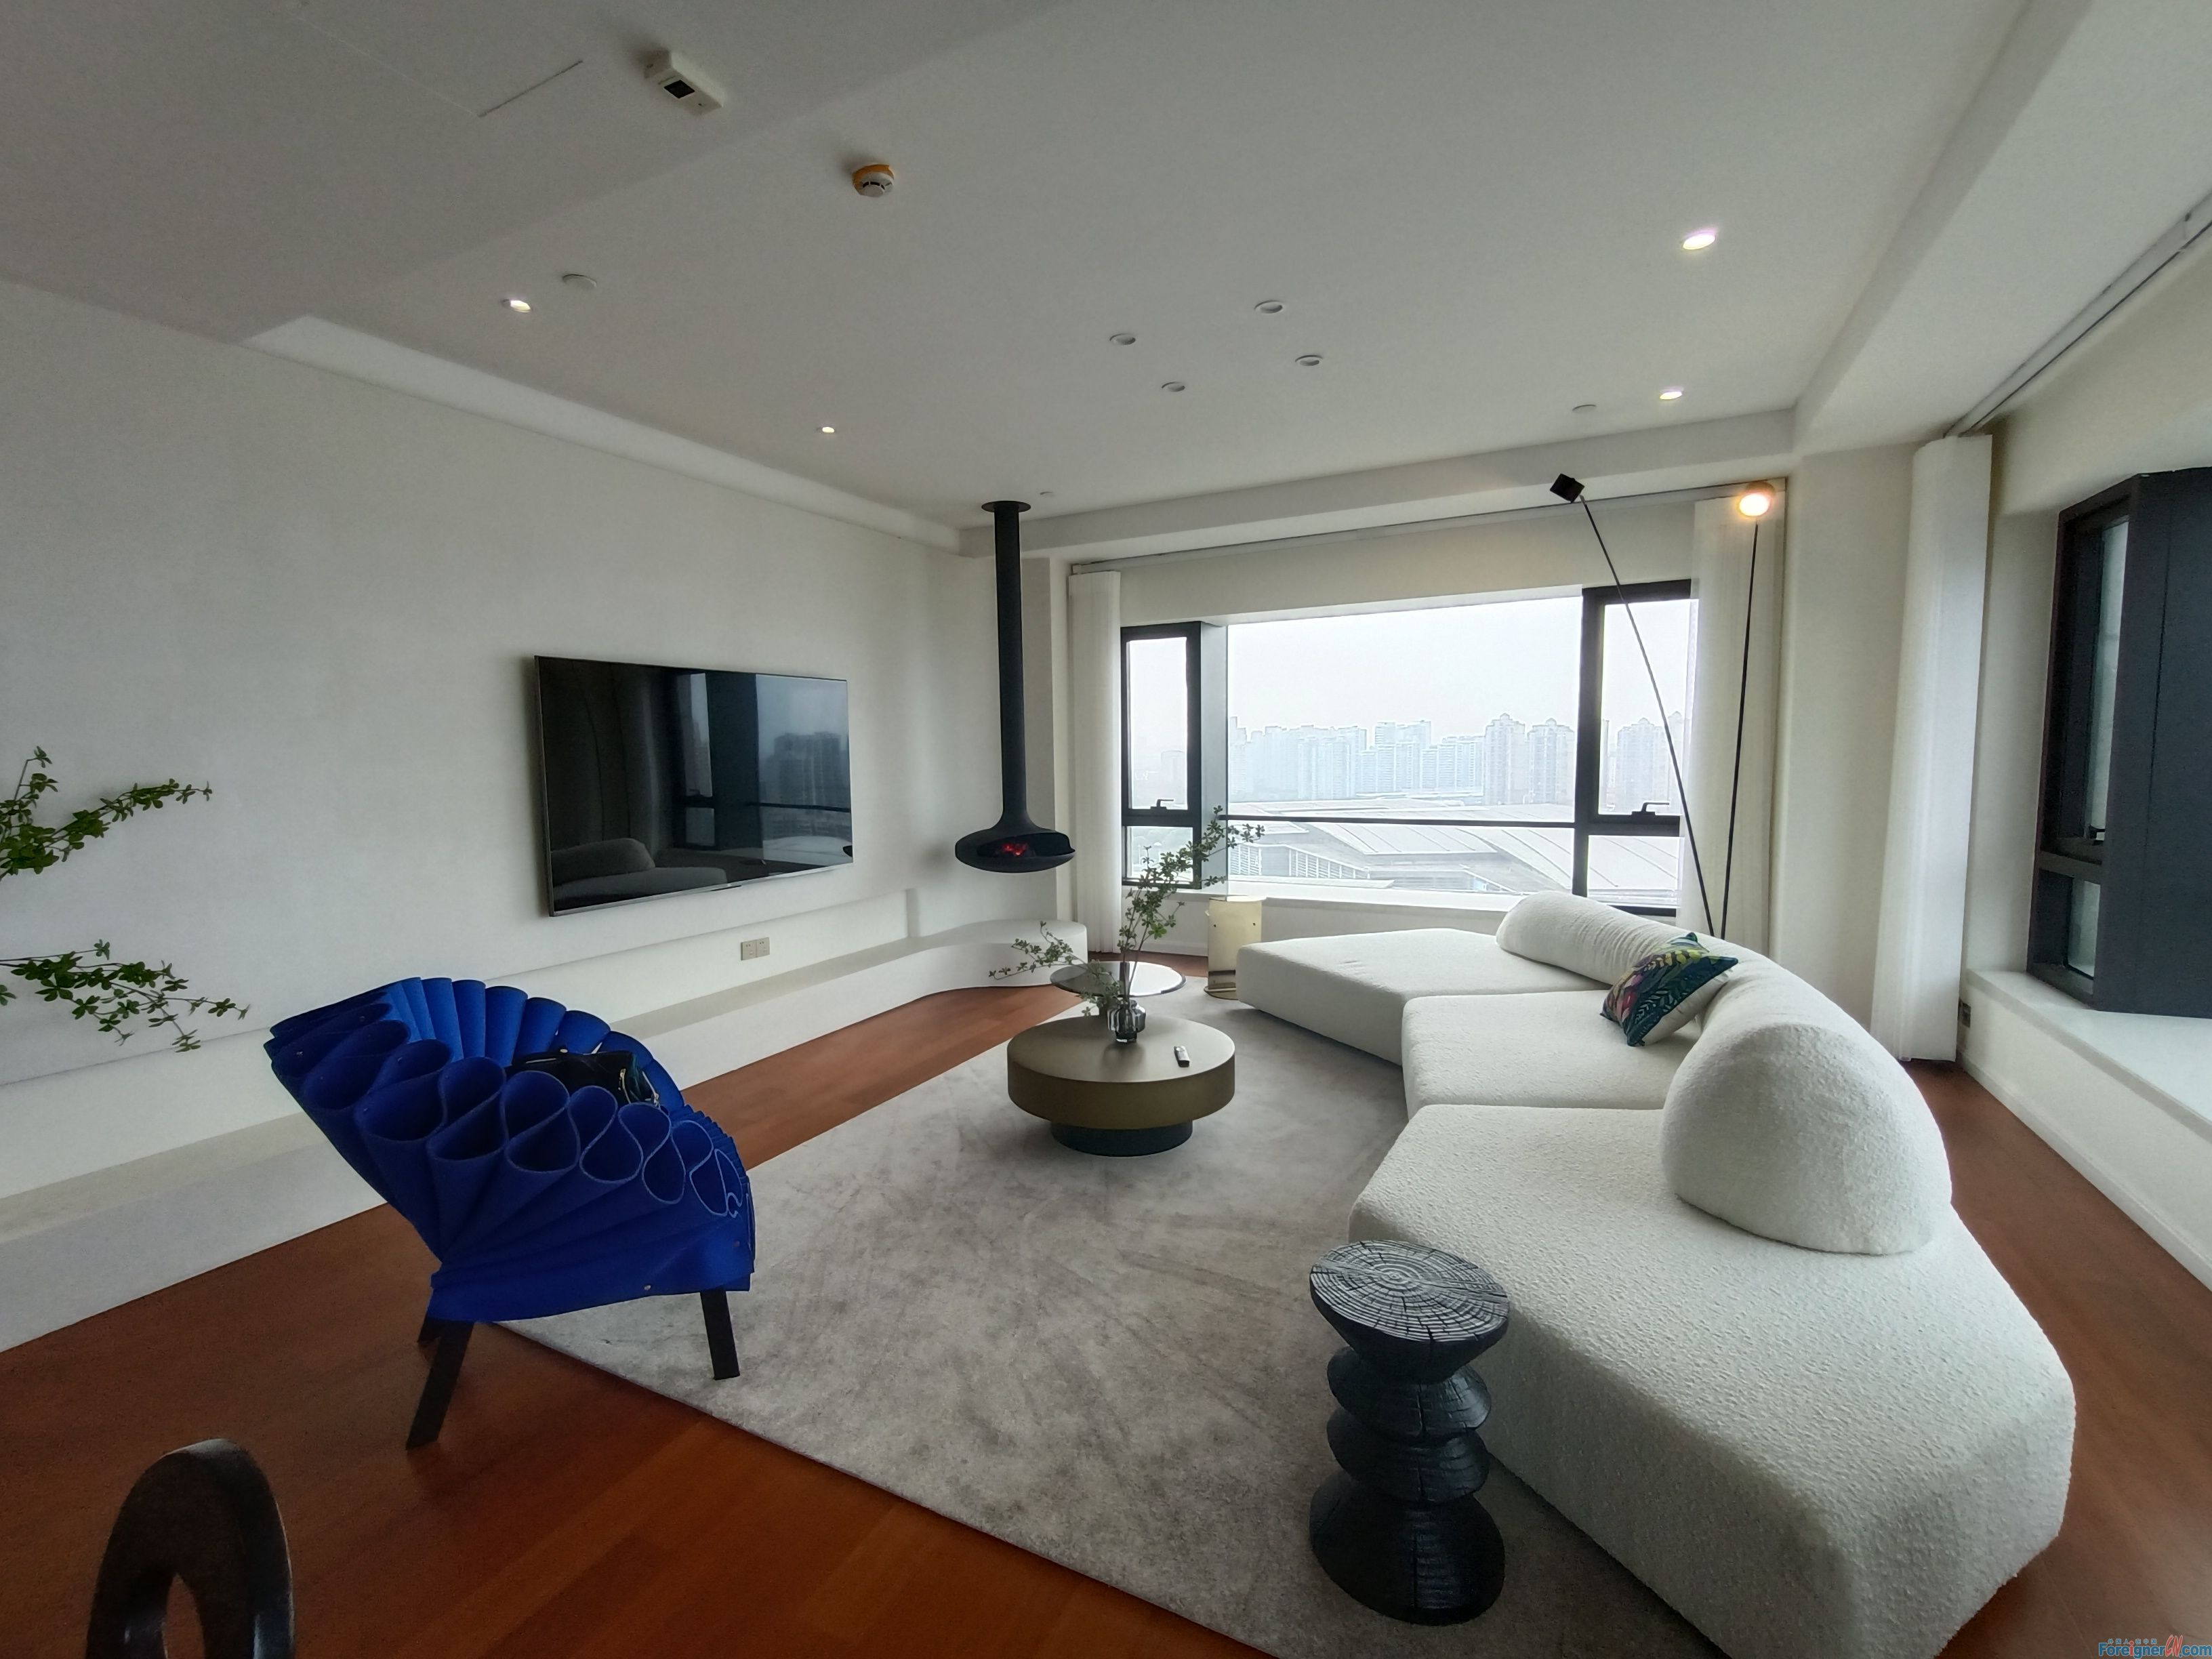 Wonderful !! Eslite Residence apartment rental in Suzhou/1 bedroom 1 bath /Floor heating and central AC/Time Square,Subway line 1/Jinji Lake/SIP